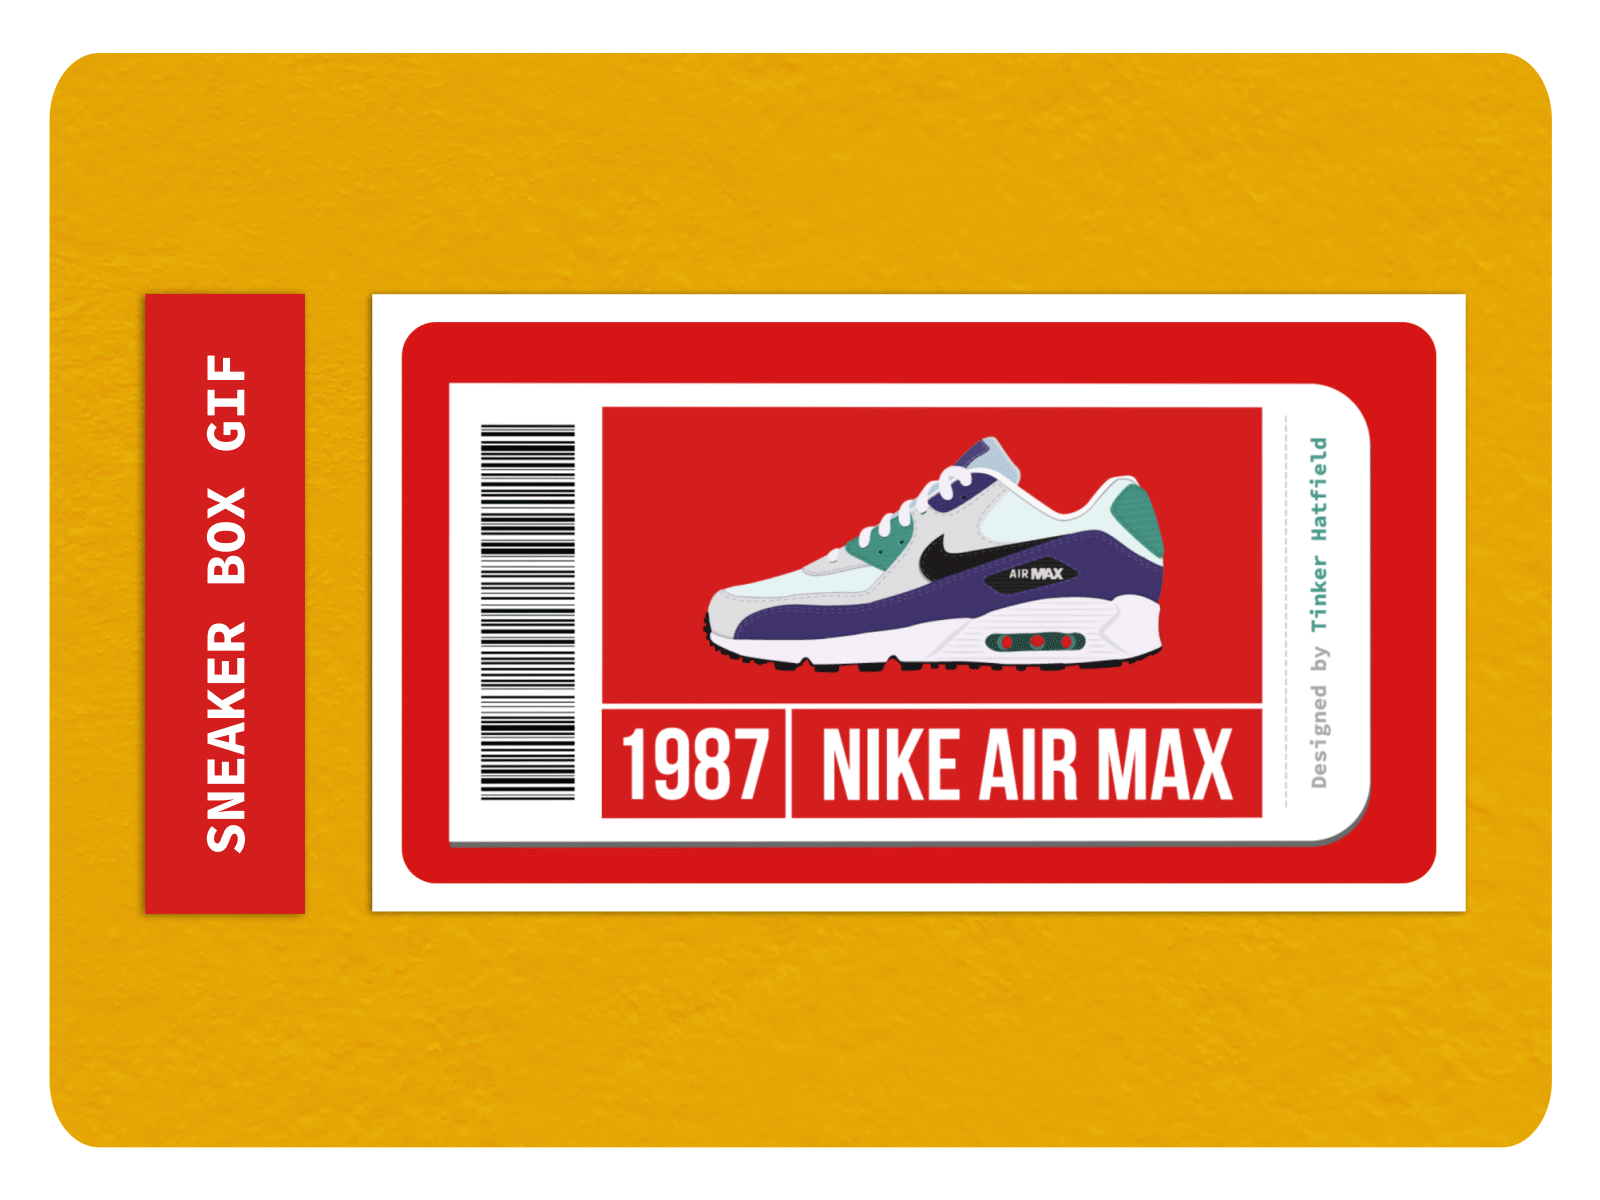 Sneaker Box by Ahmed Elmesery on Dribbble Pertaining To Nike Shoe Box Label Template